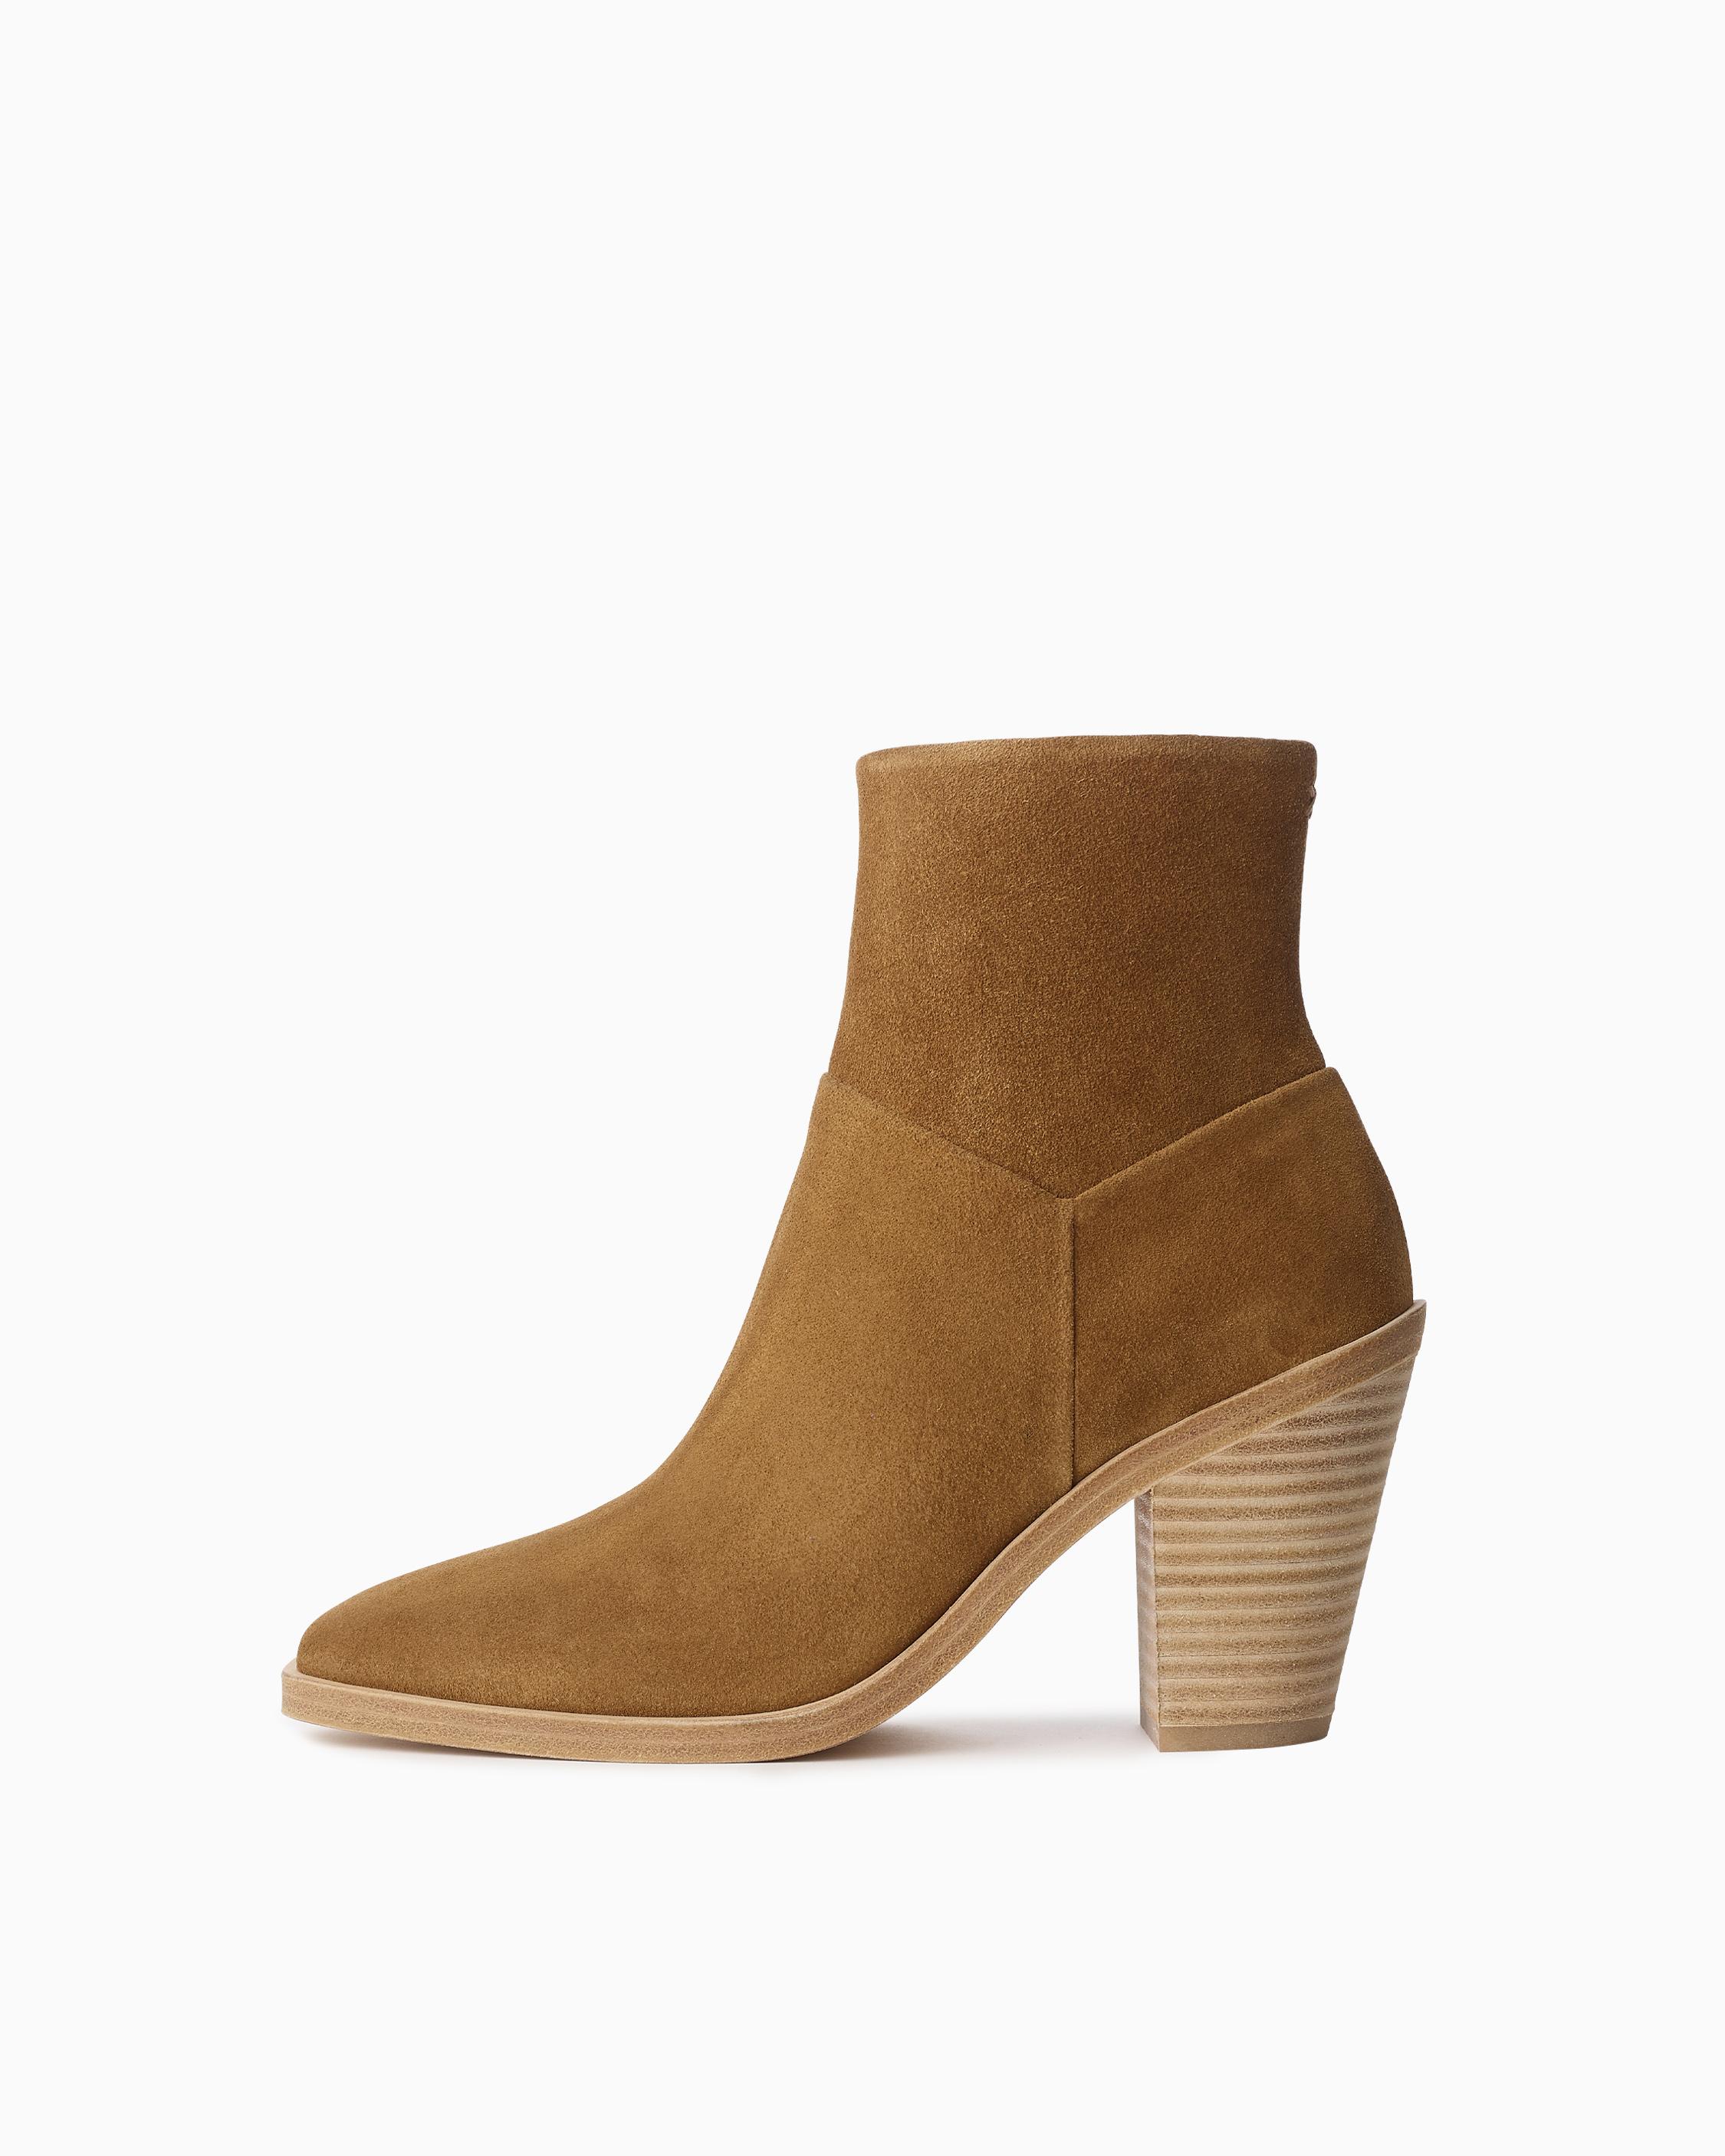 Buy > rag and bone boots nordstrom > in stock